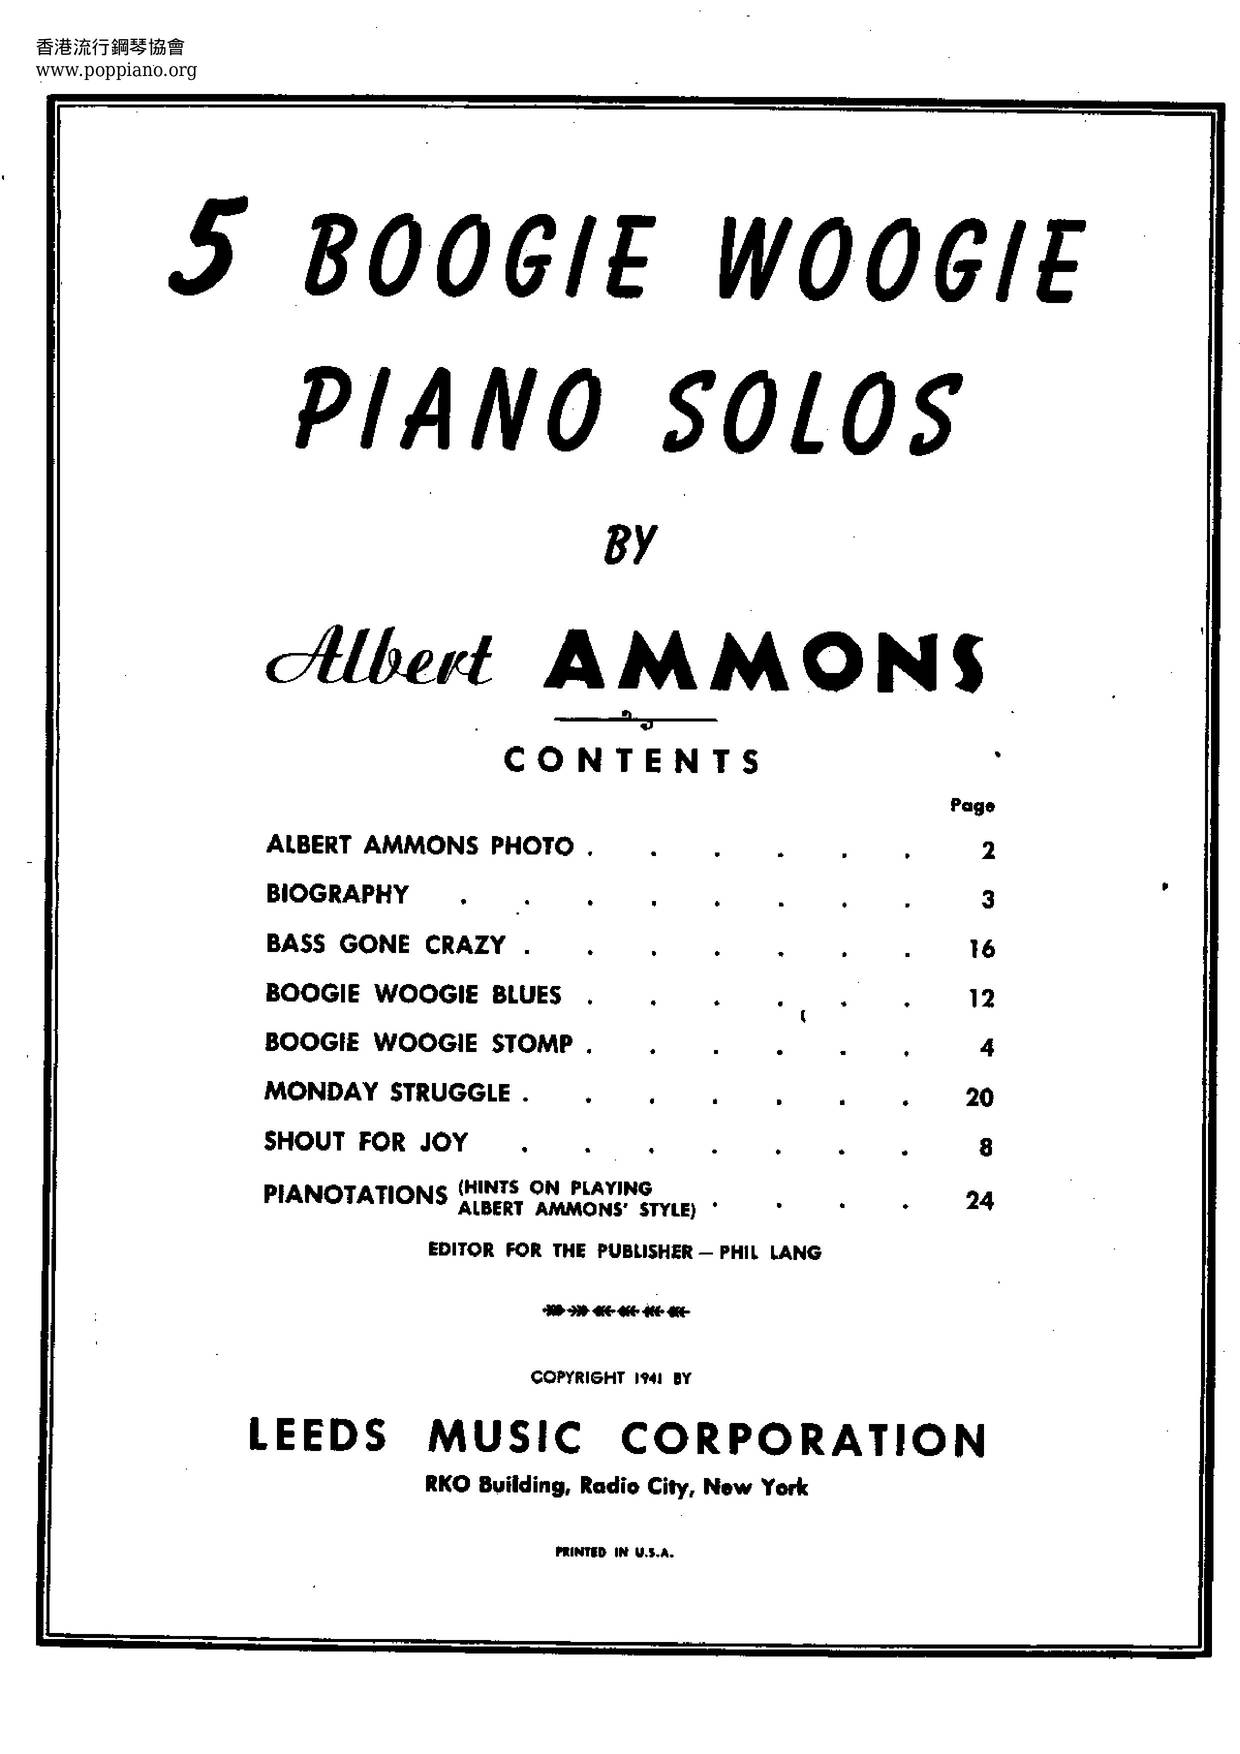 Albert Ammons 5 Boogie Woogie Piano Solos 28 Pages Sheet Music Pdf Free Score Download ★ 